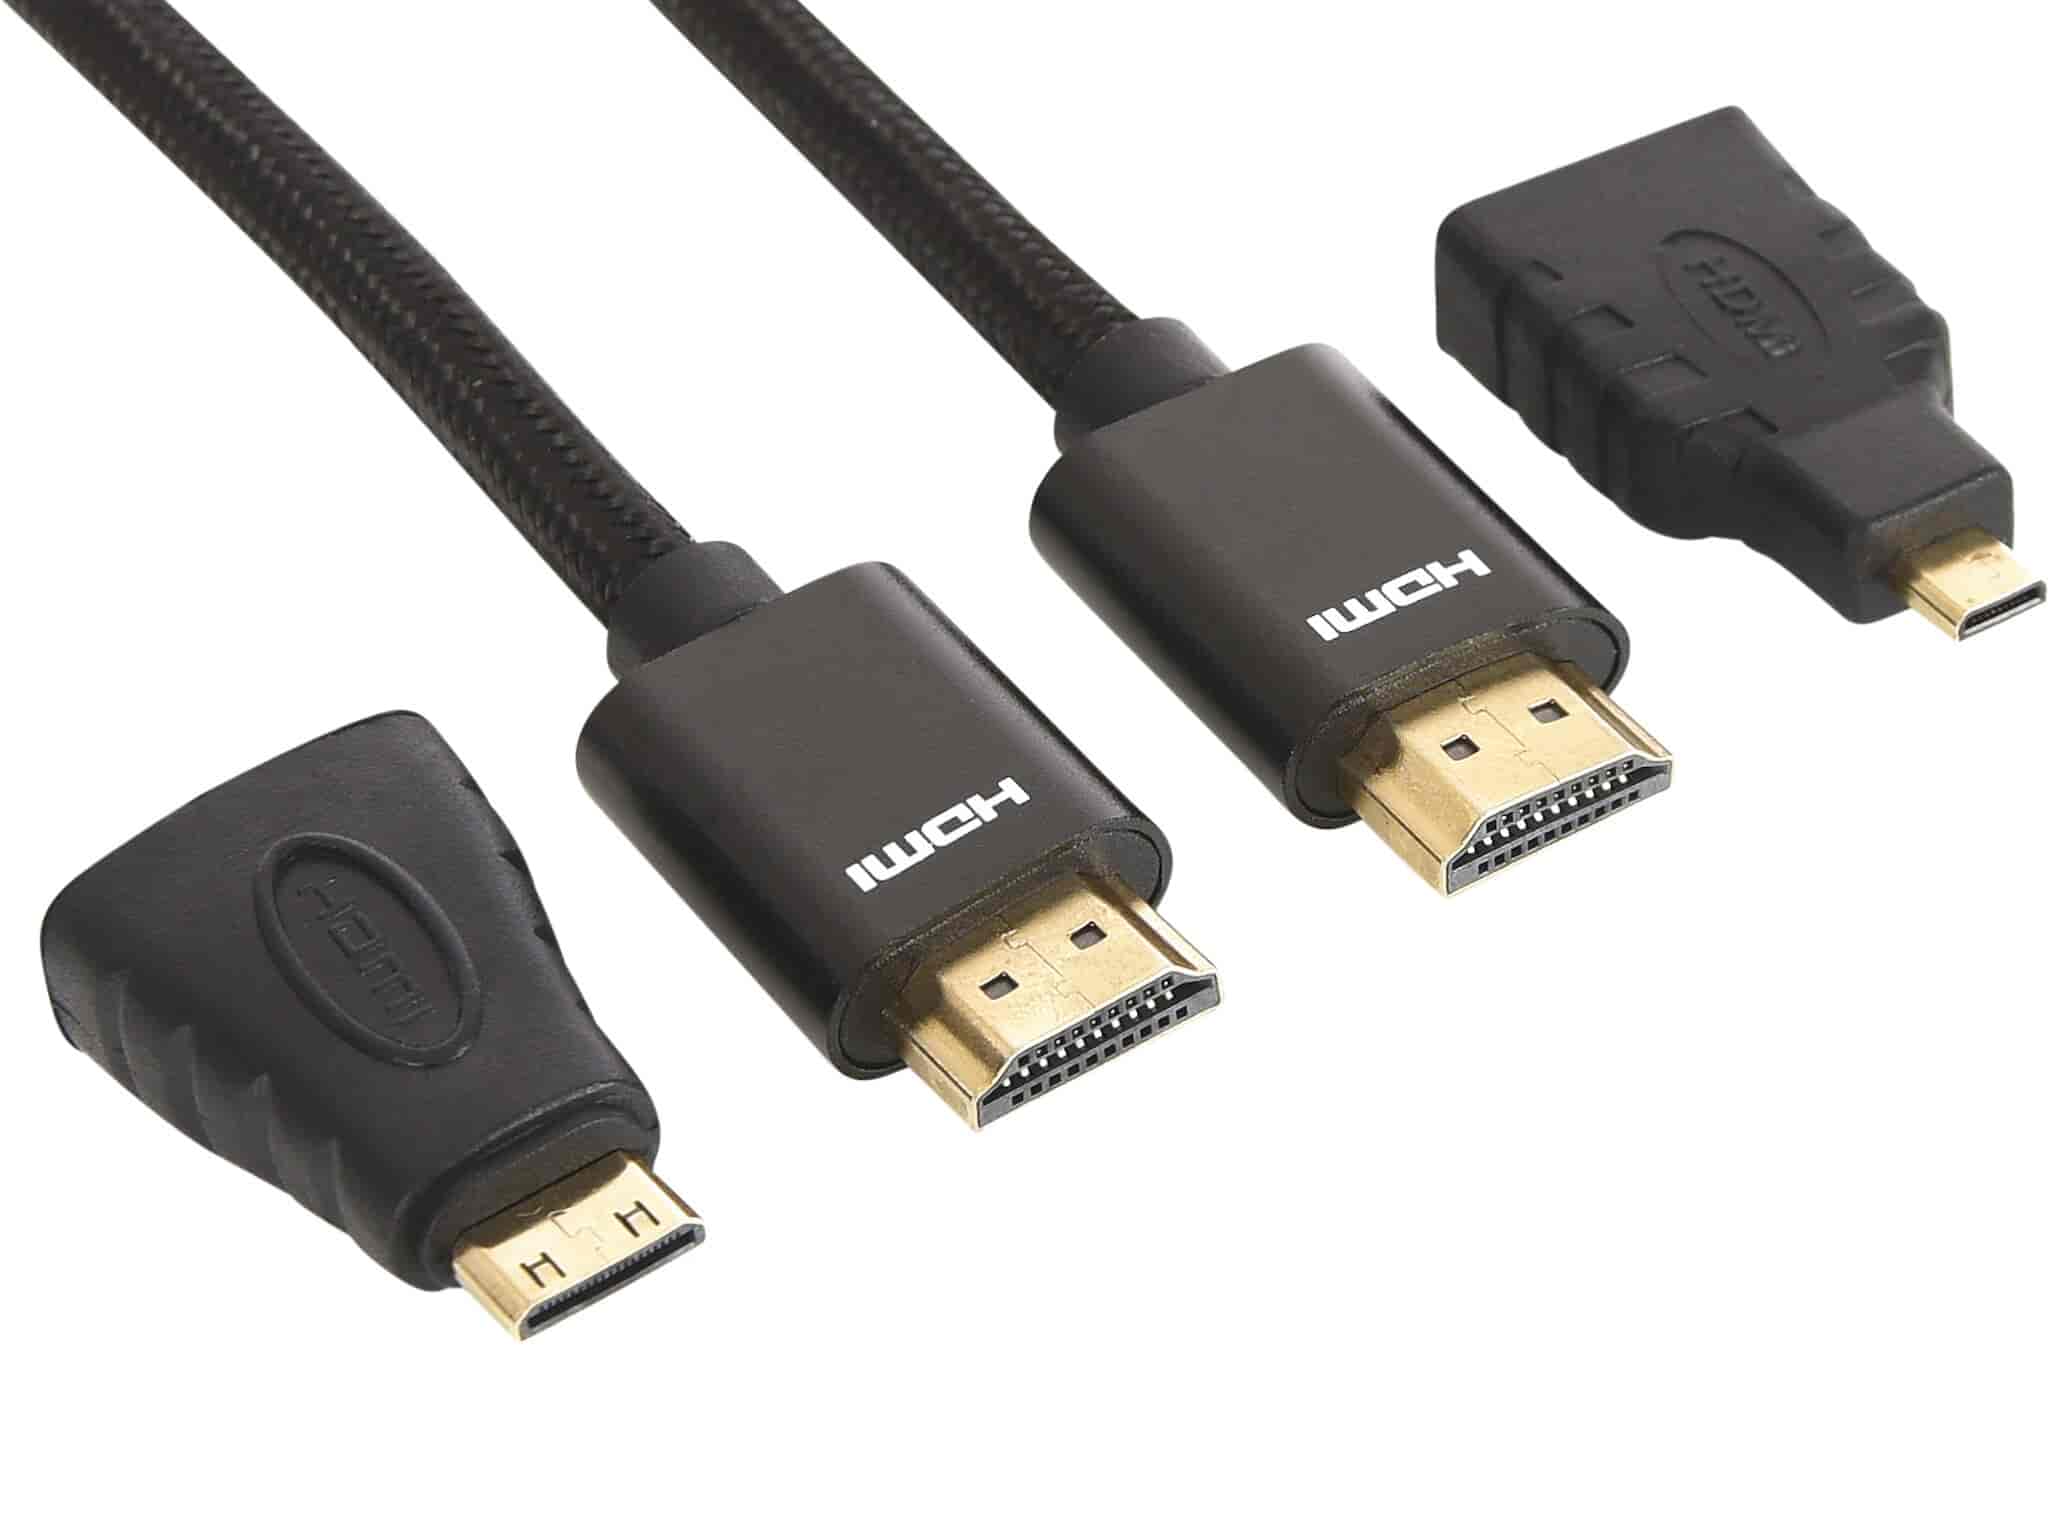 Sandberg Excellence HDMI 19M+Micro+MiniWith HDMI you can transfer razor-sharp digital quality sound and images. You can use this cable to connect HDMI devices like your Blu-Ray player or games console to your TV with an HDMI connector. In addition, Mini and Micro HDMI adapters are included in the box. The complete solution to fit all your HDMI equipment!Sandberg